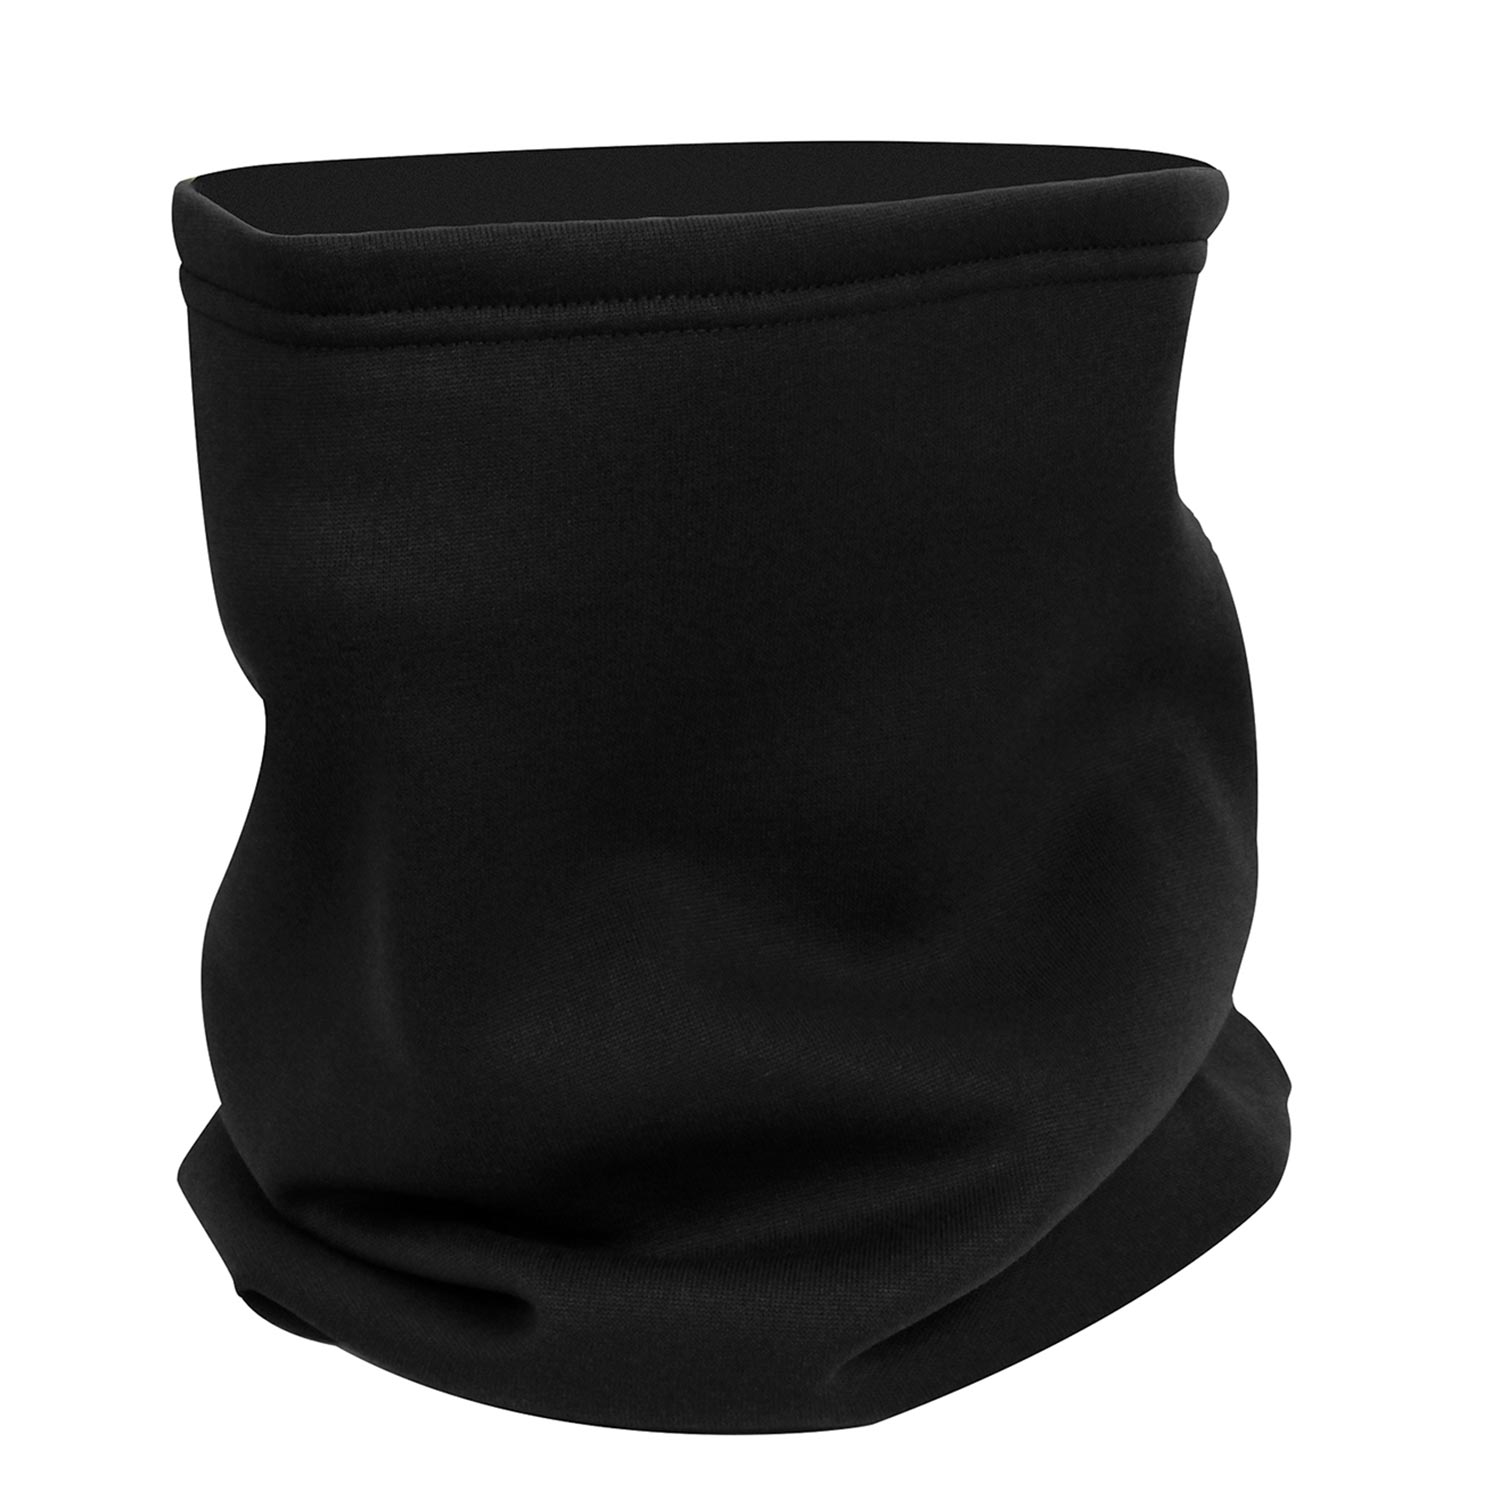 ROTHCO ECWCS POLYESTER NECK GAITER